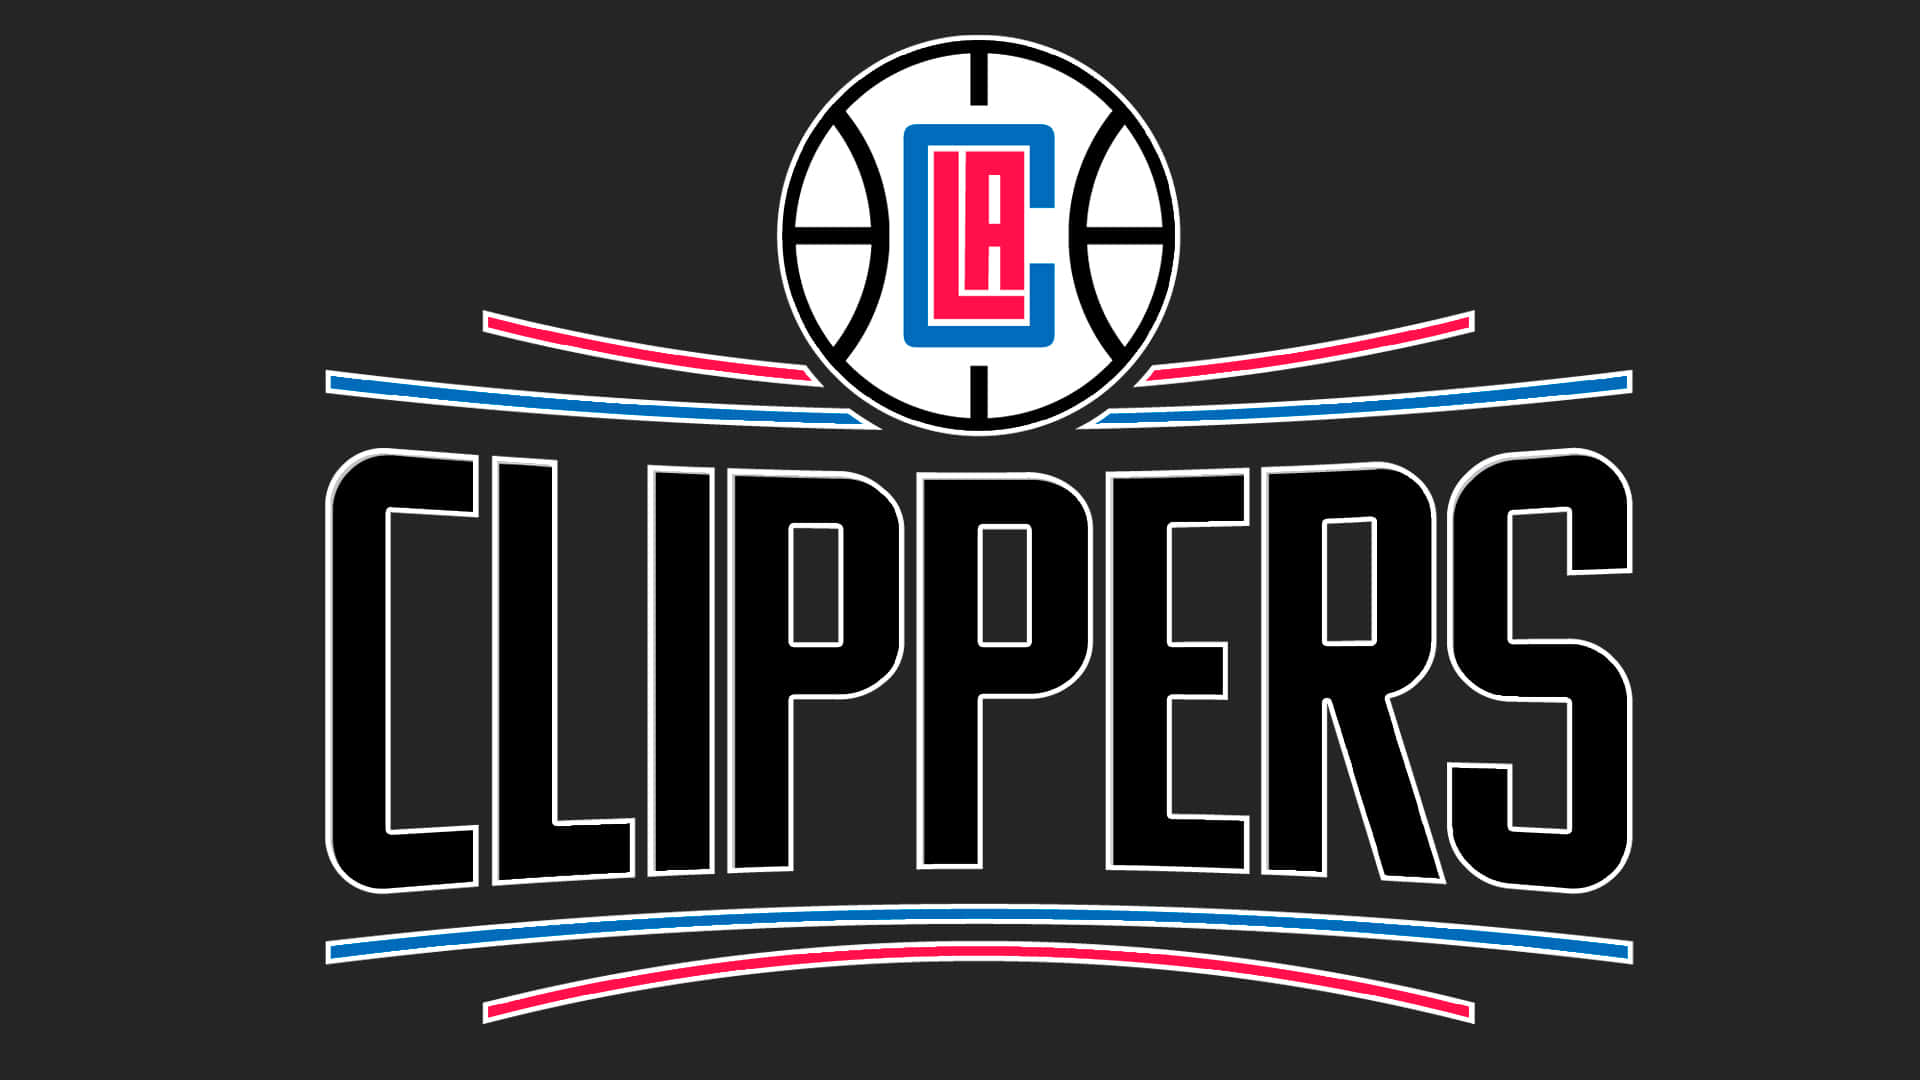 The Energizing Logo of LA Clippers Basketball Team Wallpaper